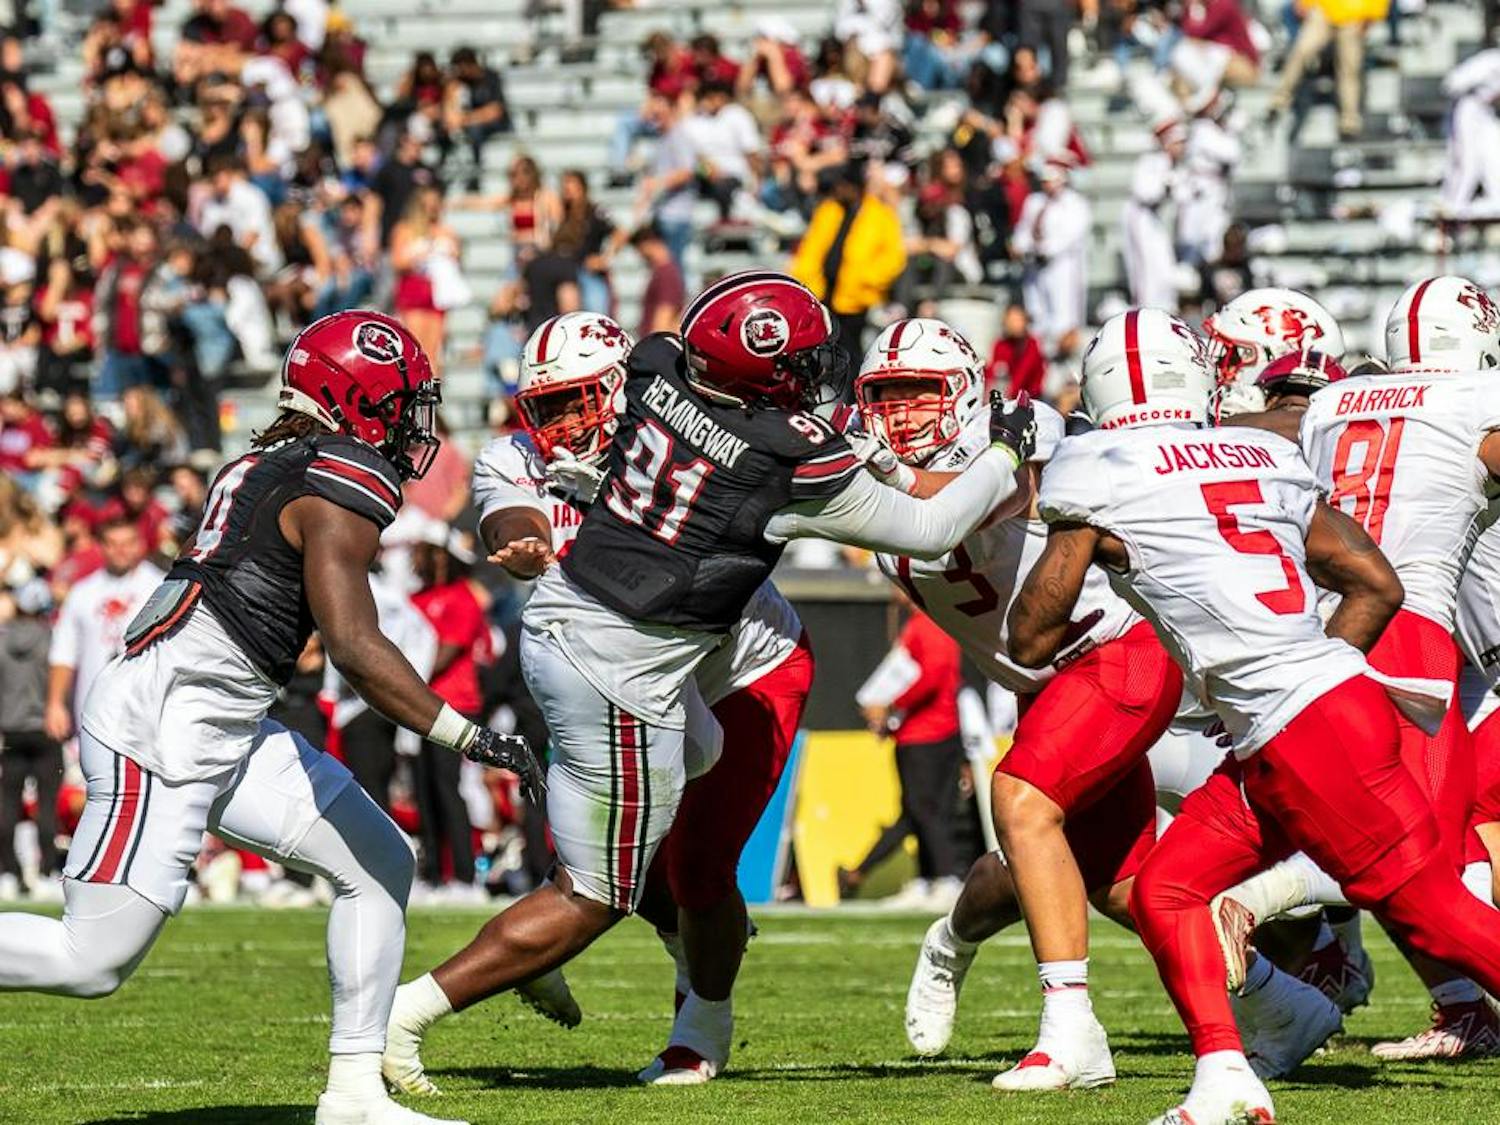 Senior defensive tackle Tonka Hemingway goes in to tackle Jacksonville State freshman quarterback Earl Woods III during the second quarter at Williams-Brice Stadium on Nov. 4, 2023. Hemingway went on to catch the fumble, overturning the ball for South Carolina.